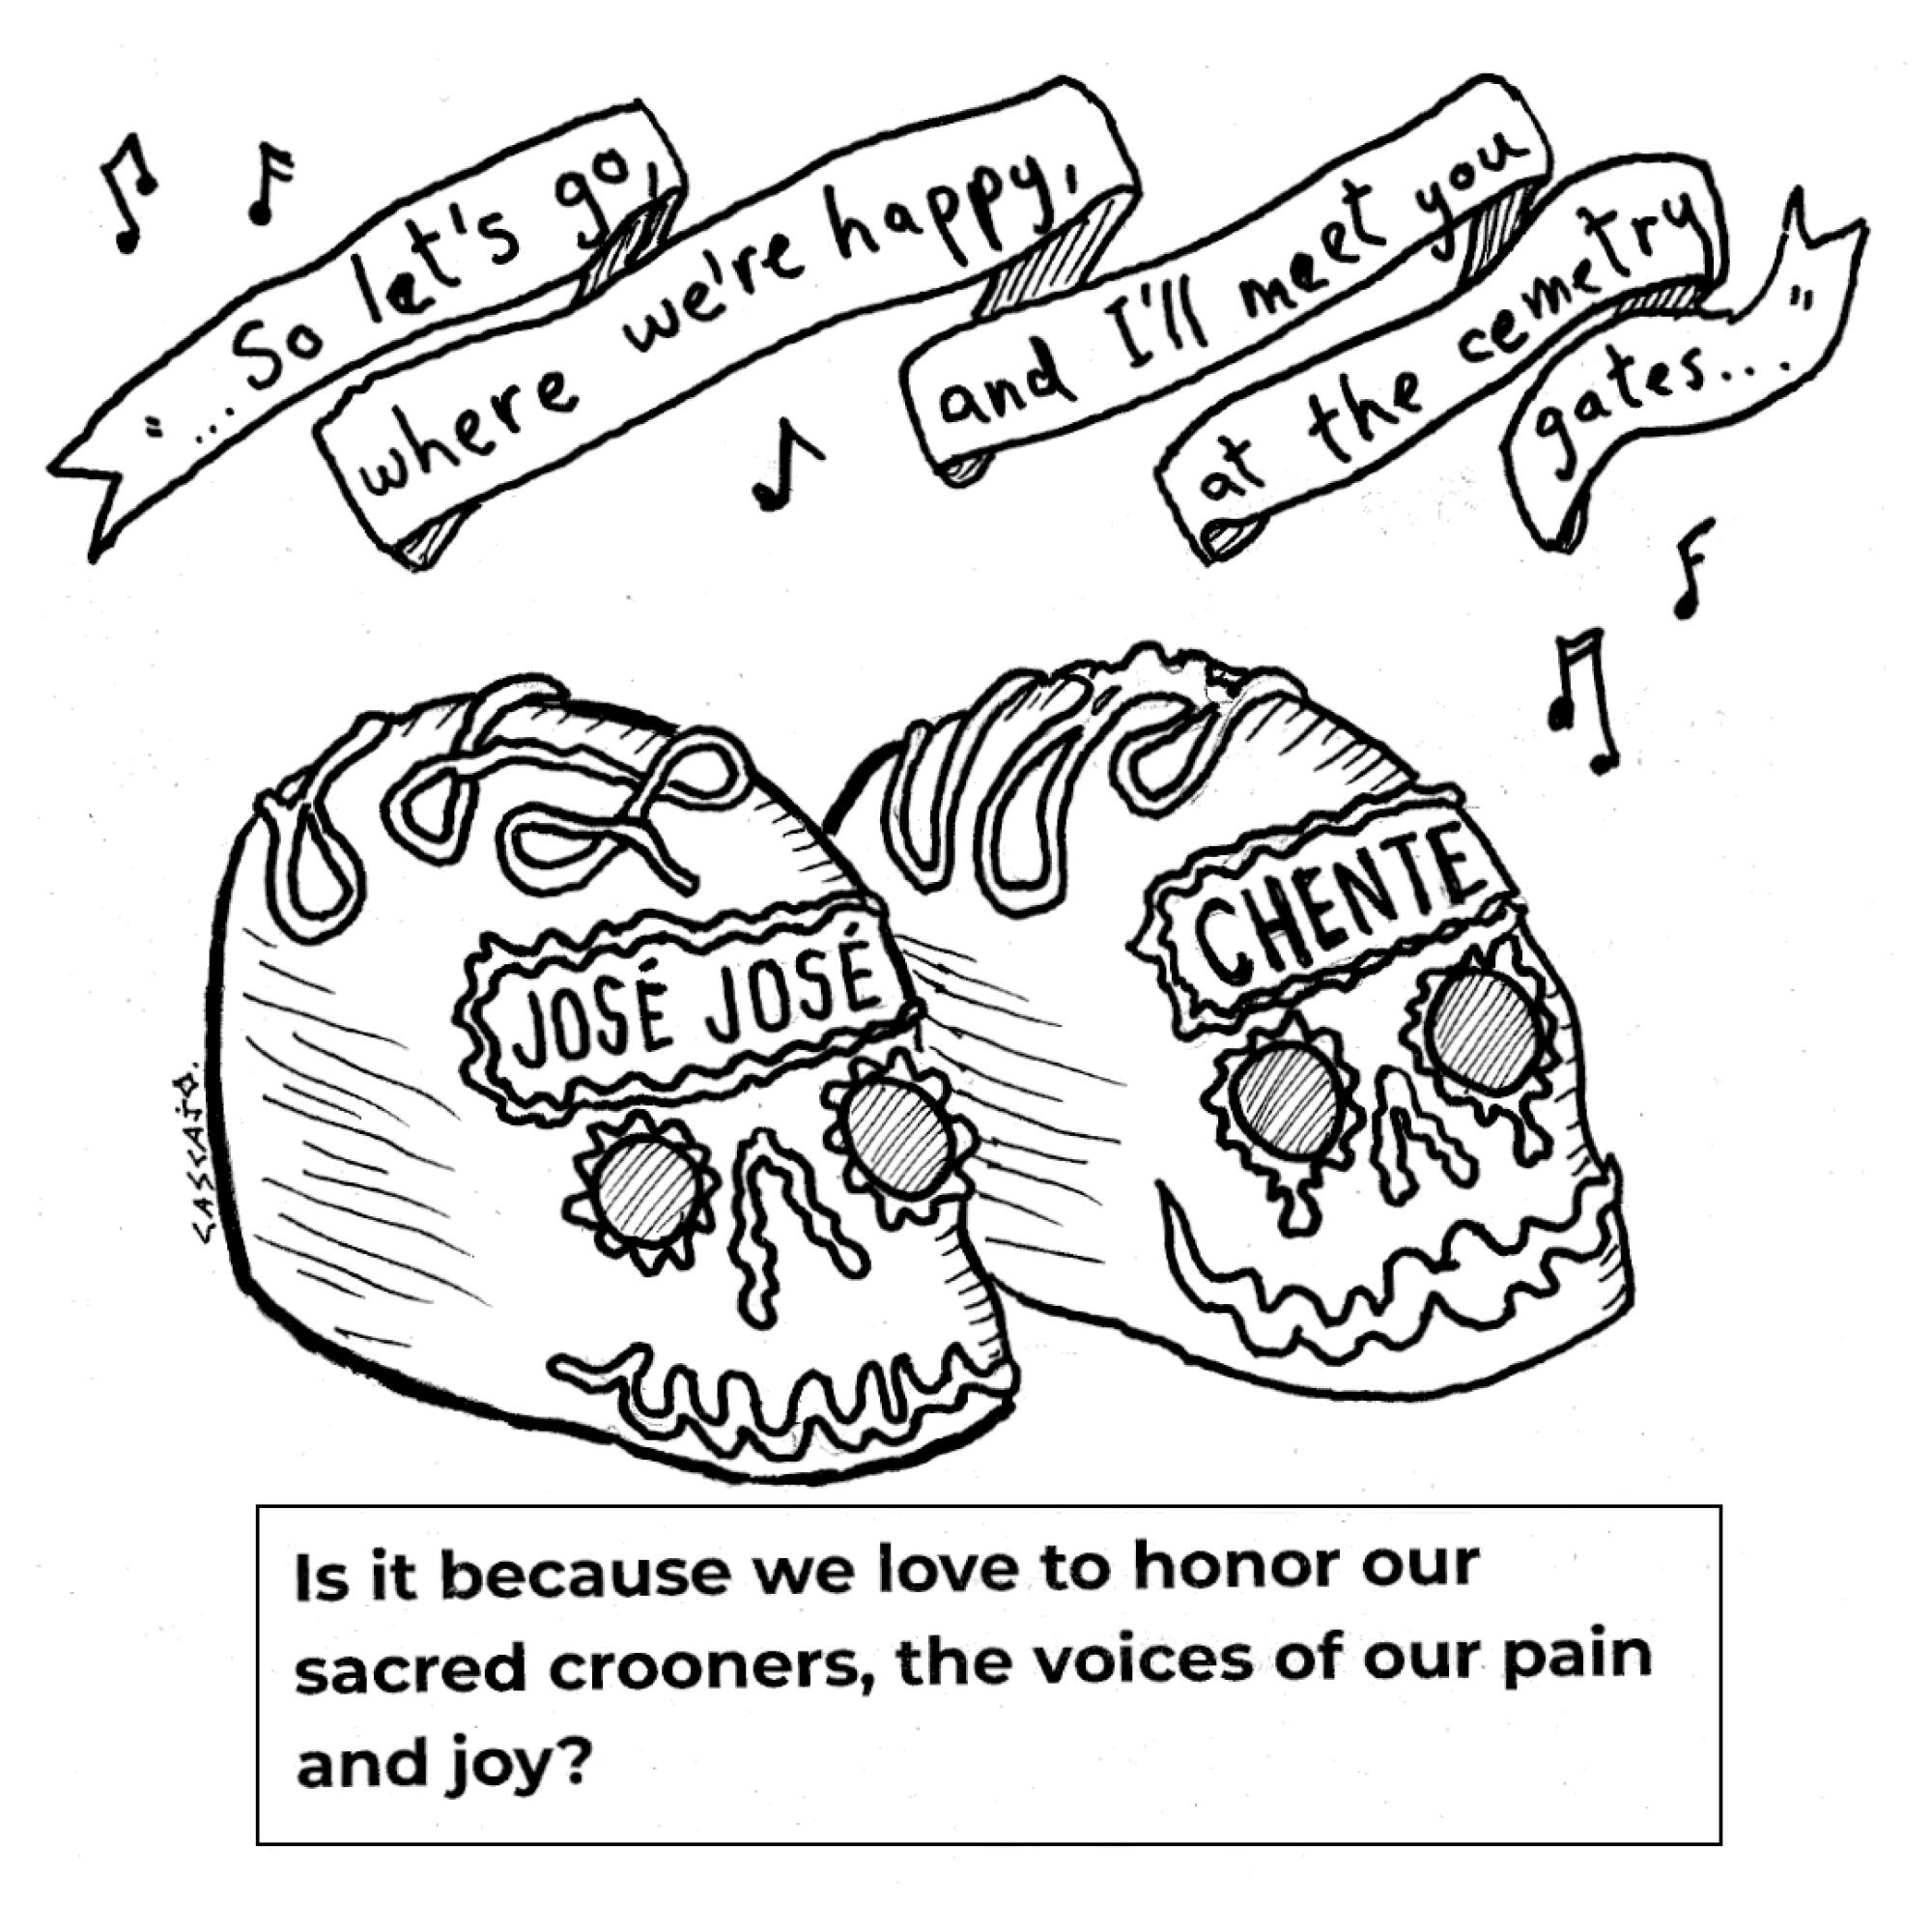 Is it because we love to honor our sacred crooners, the voice of our pain and joy?